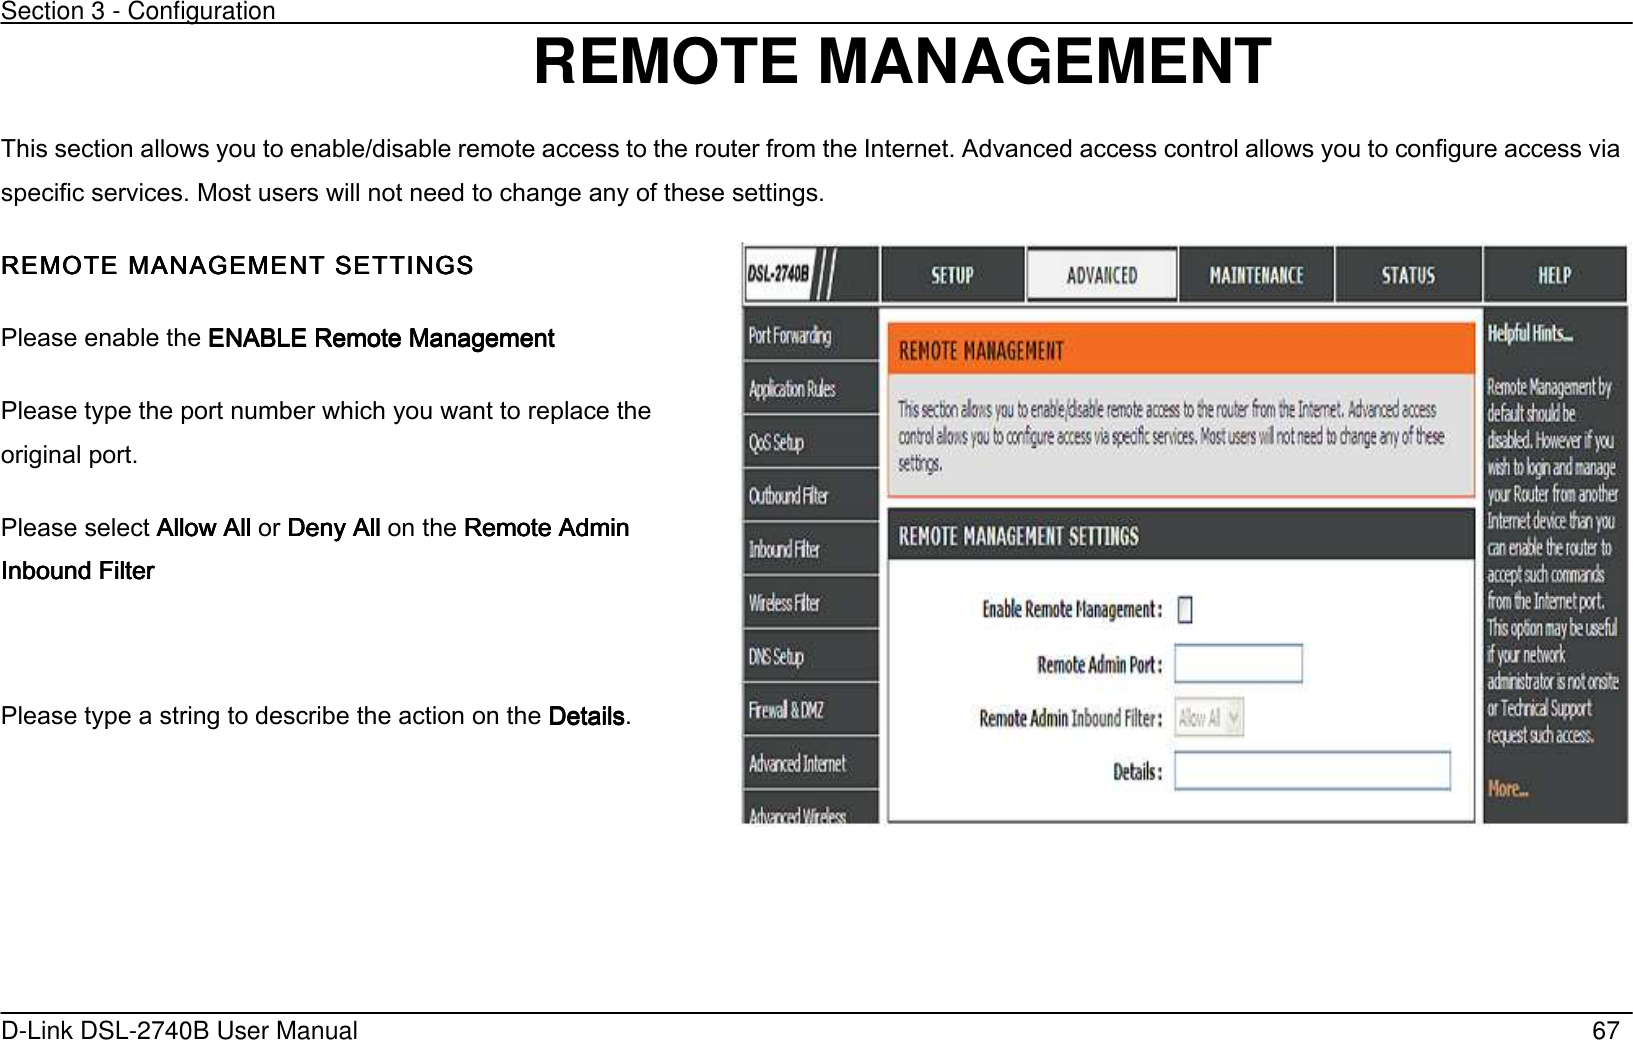 Section 3 - Configuration   D-Link DSL-2740B User Manual                                                  67 REMOTE MANAGEMENT   This section allows you to enable/disable remote access to the router from the Internet. Advanced access control allows you to configure access via specific services. Most users will not need to change any of these settings. REMOTE MANAGEMENT SEREMOTE MANAGEMENT SEREMOTE MANAGEMENT SEREMOTE MANAGEMENT SETTINGSTTINGSTTINGSTTINGS     Please enable the ENABLE Remote Management ENABLE Remote Management ENABLE Remote Management ENABLE Remote Management      Please type the    port number which you want to replace the original port.    Please select Allow AllAllow AllAllow AllAllow All or Deny All Deny All Deny All Deny All    on the Remote Admin Remote Admin Remote Admin Remote Admin Inbound FiltInbound FiltInbound FiltInbound Filterererer     Please type a string to describe the action on the DetailsDetailsDetailsDetails.   